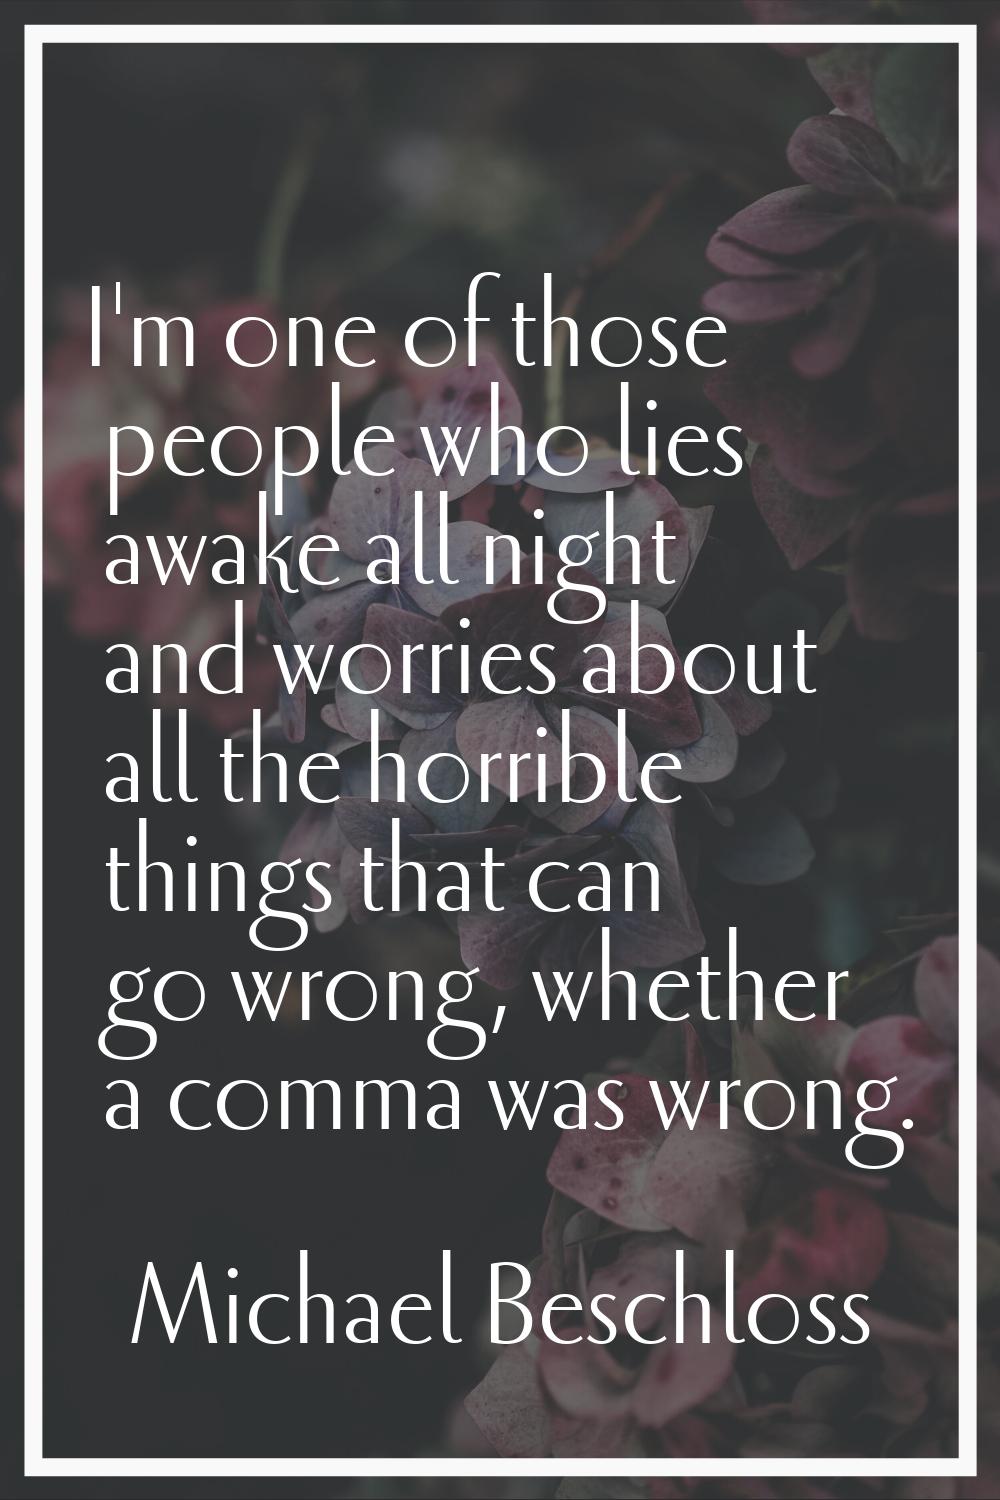 I'm one of those people who lies awake all night and worries about all the horrible things that can